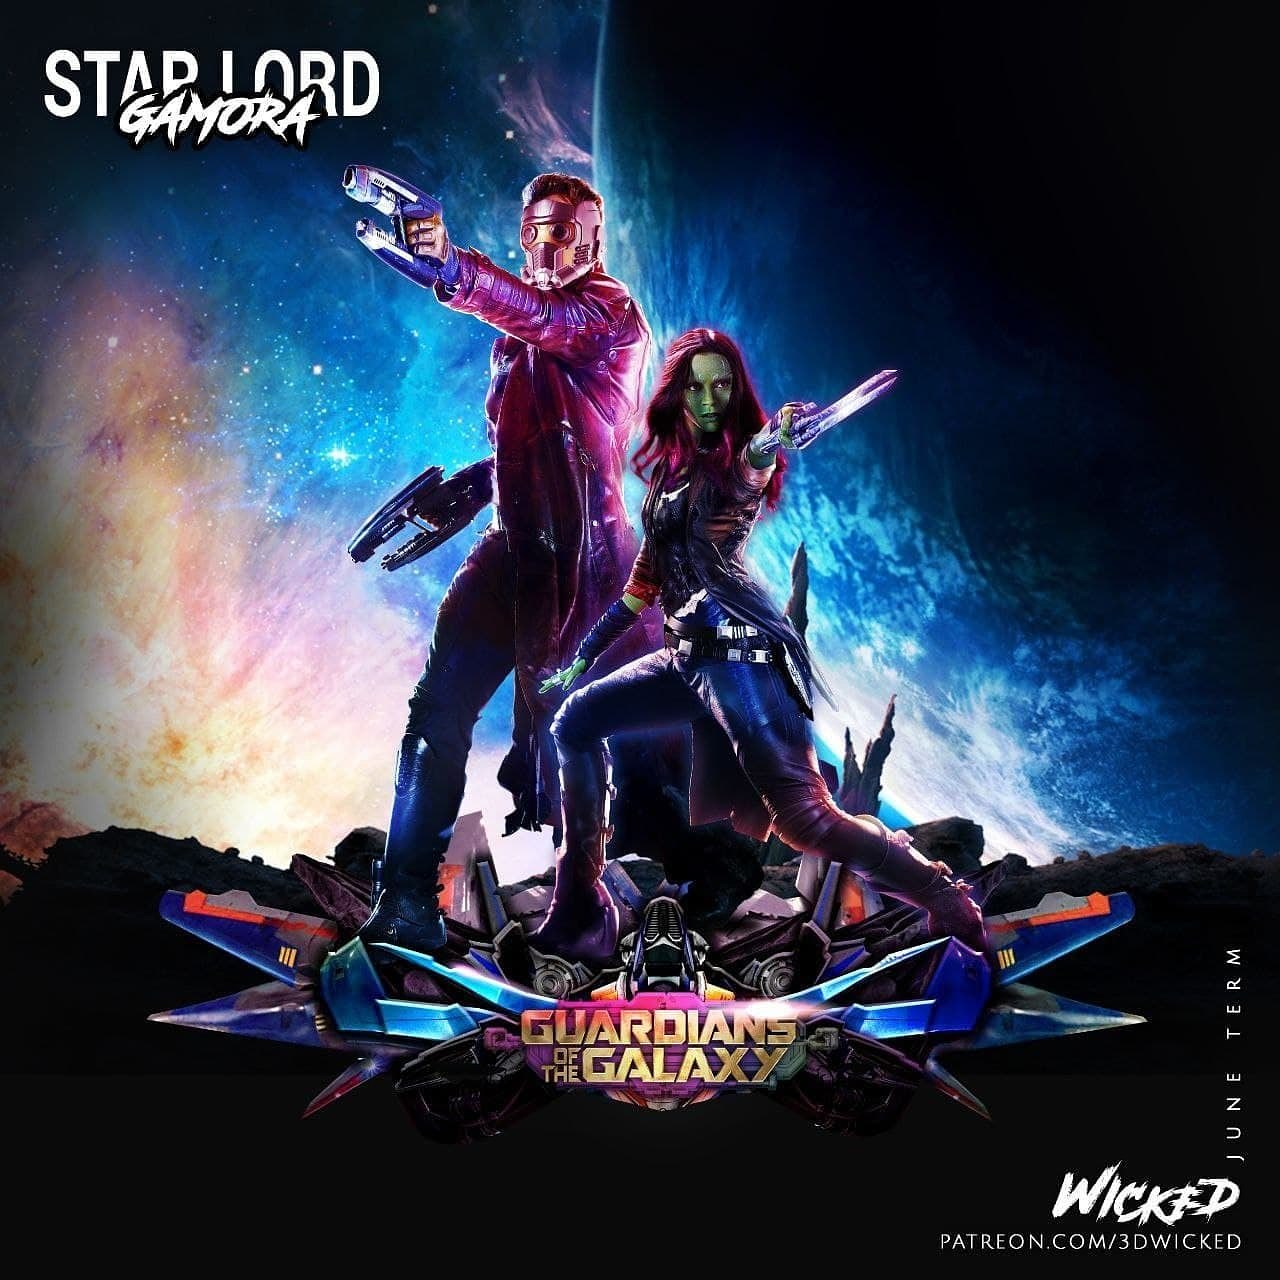 Gamora and Star Lord from Guardians of the Galaxy